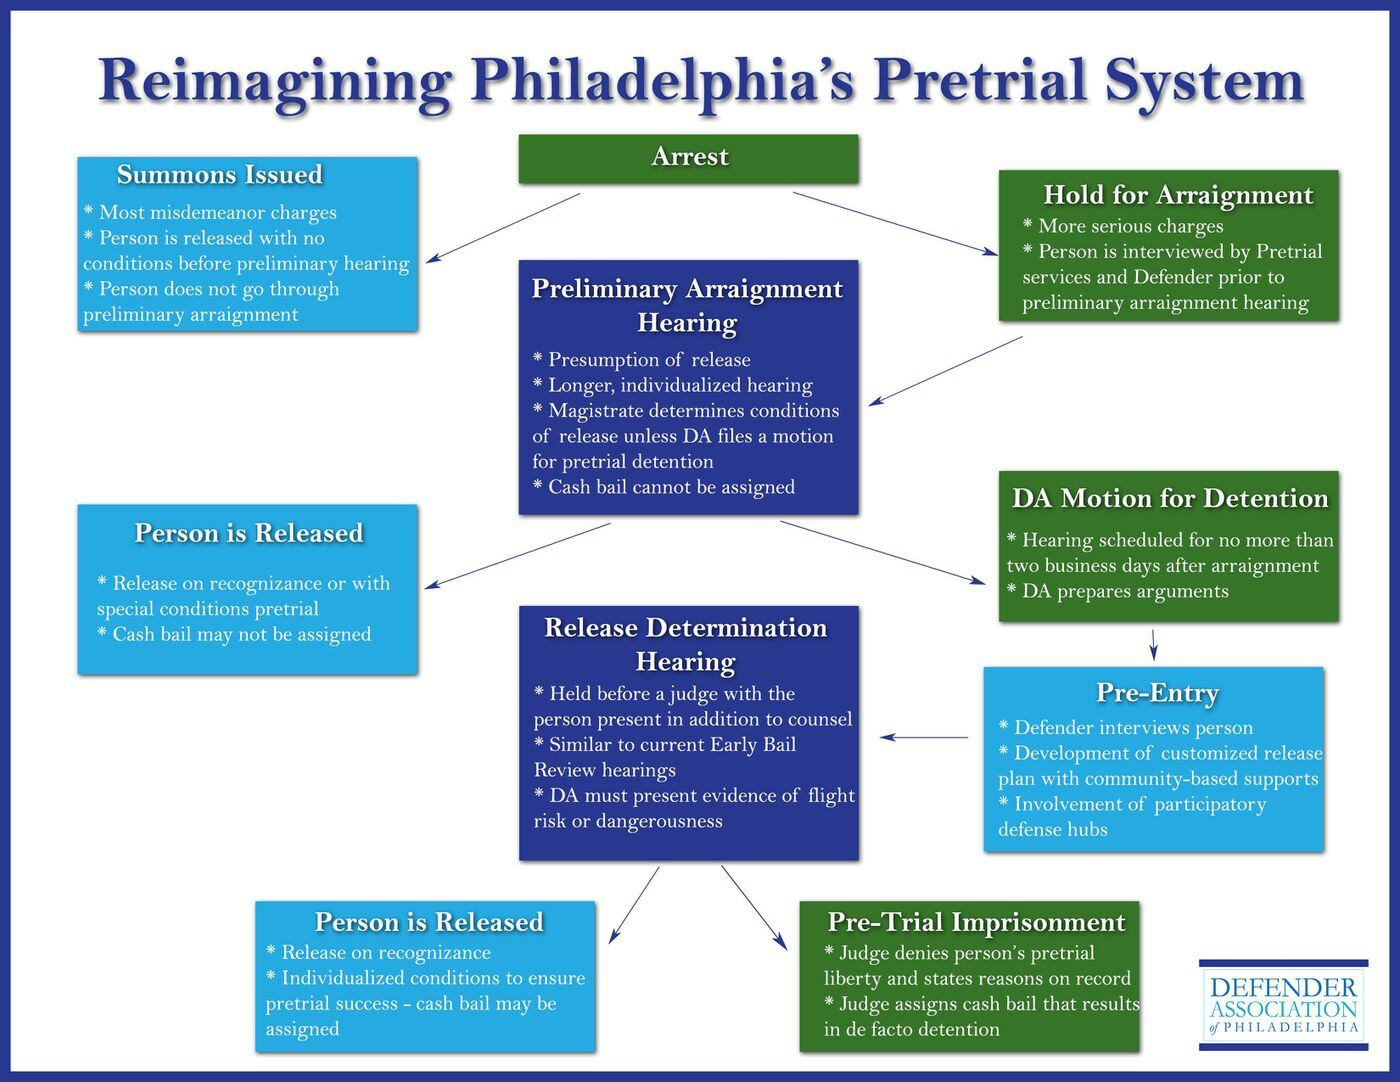 A flow chart from the Defender Association depicting a proposal to eliminate cash bail in Philadelphia.